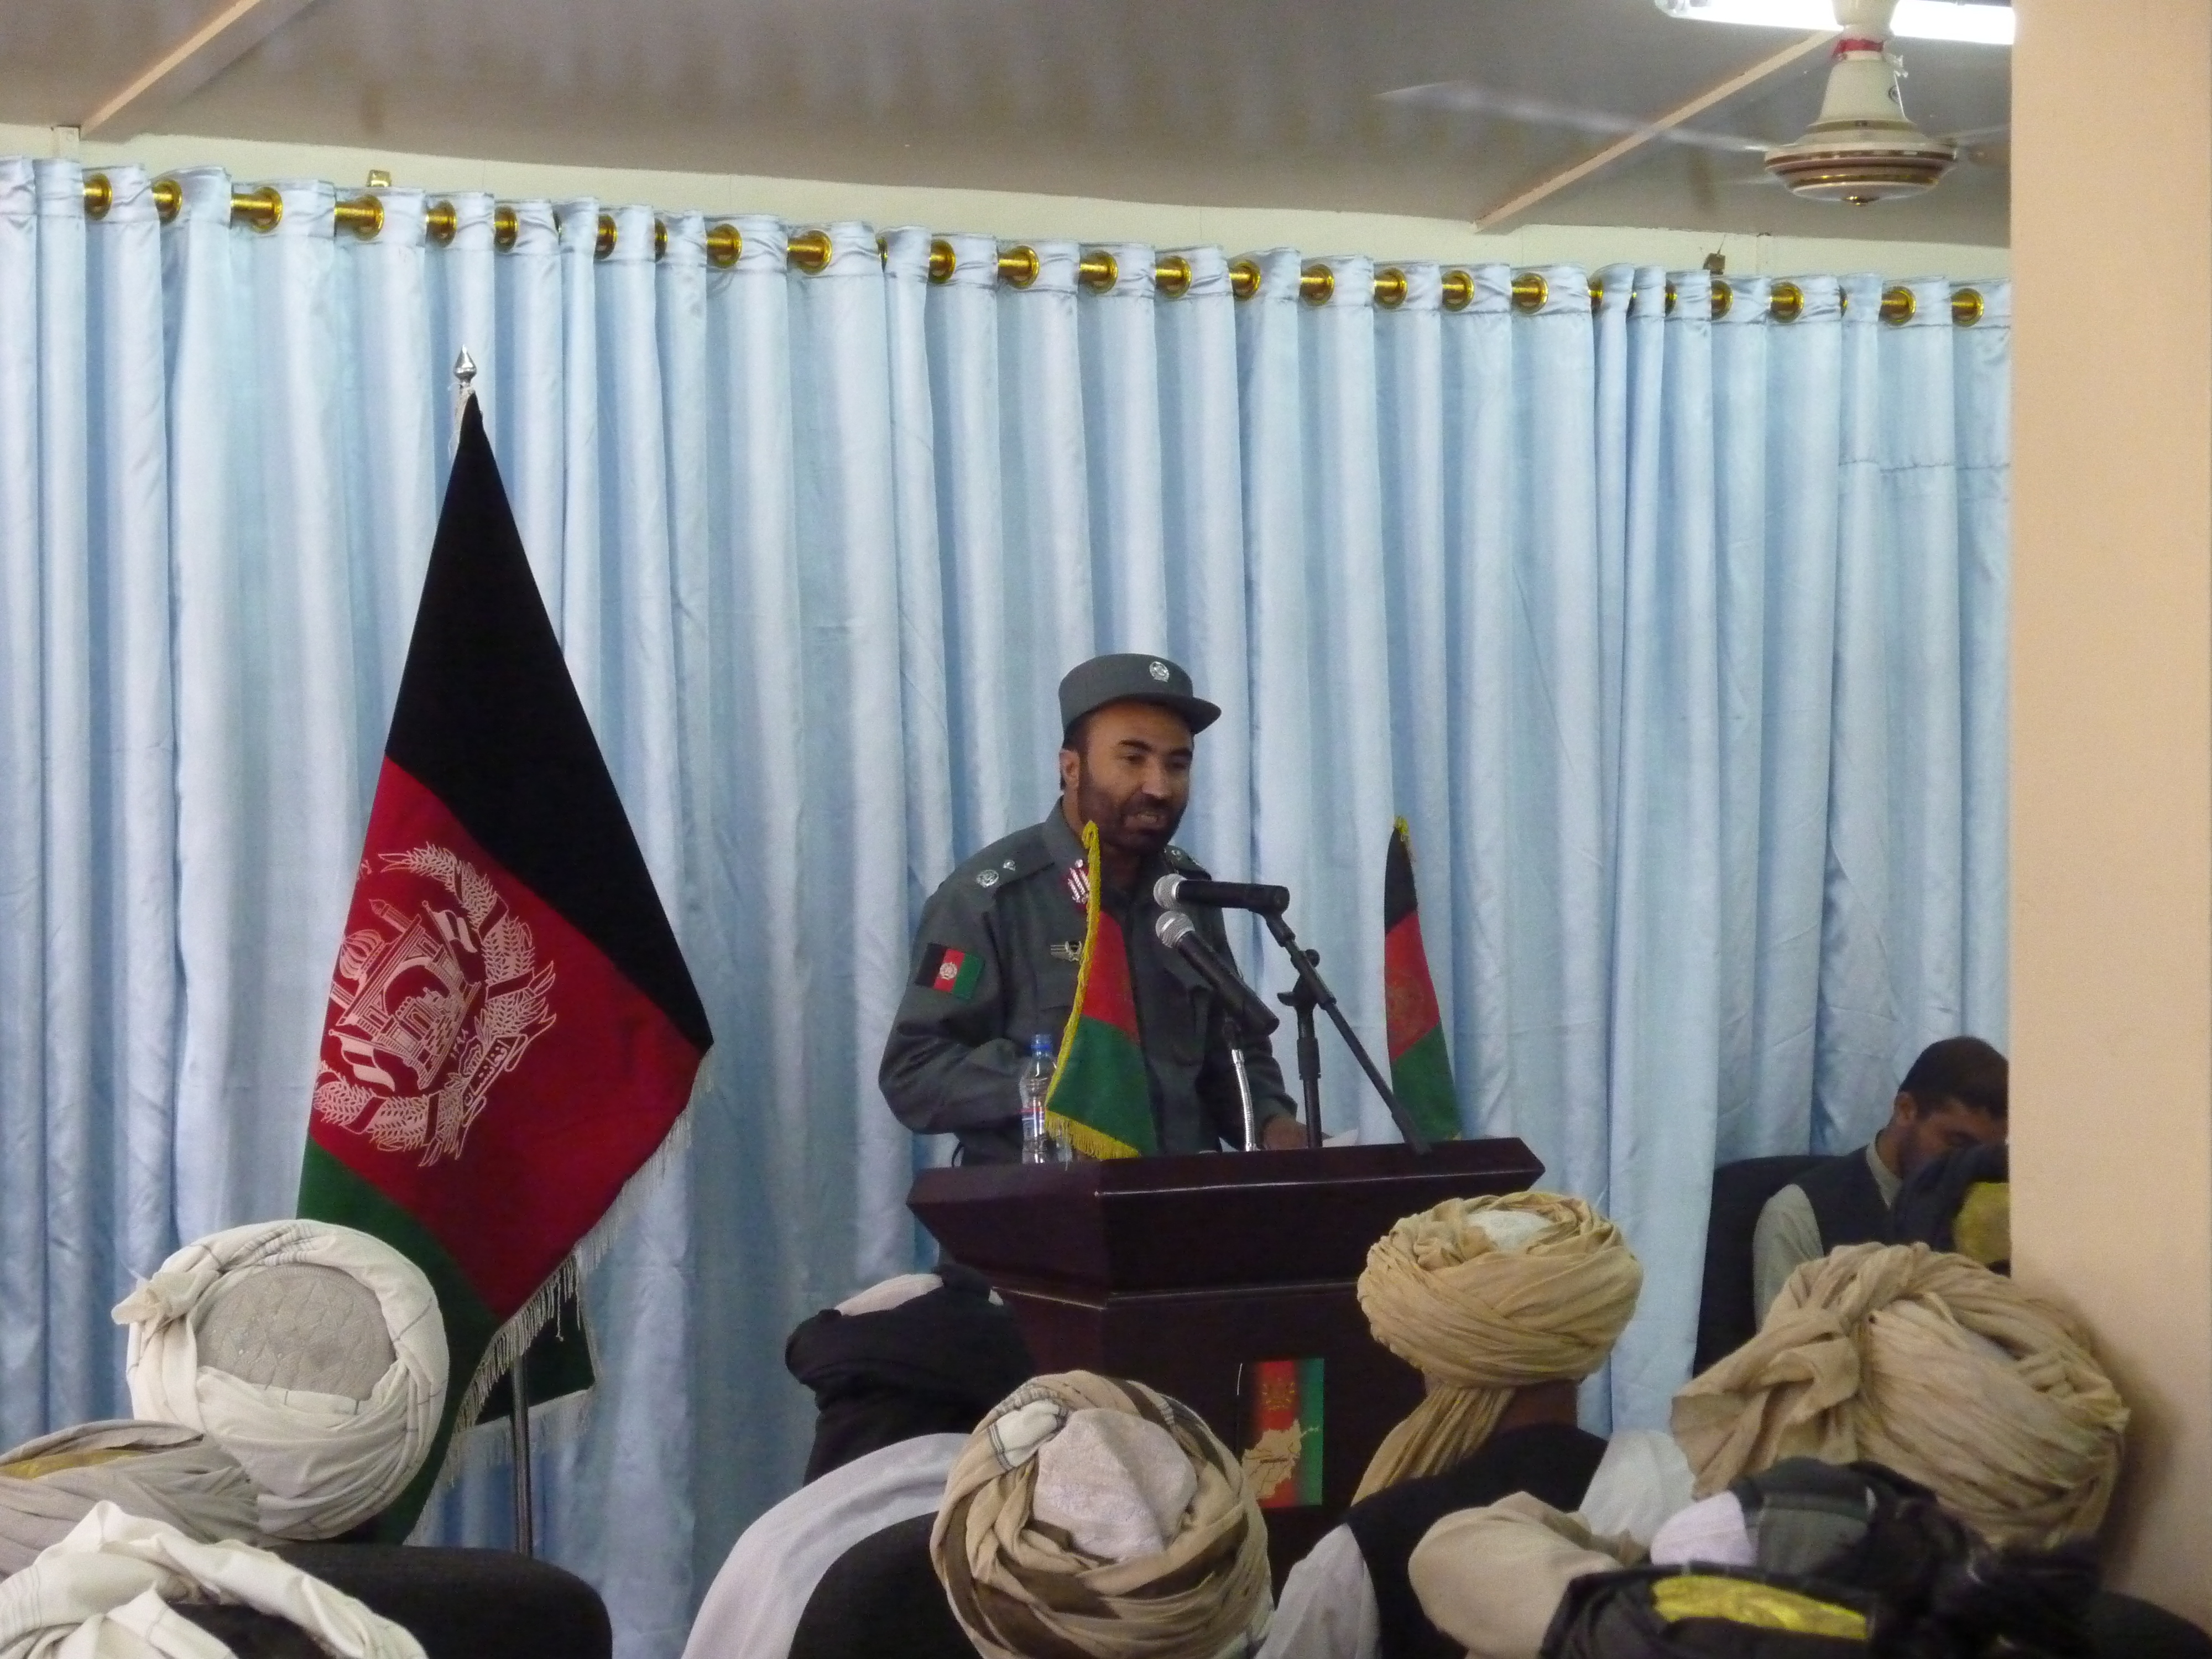 Afghan uniformed police Gen. Dawlat Khan of Paktika province speaks to the assembled mullahs about the need for peace and stability for their country and the Afghan people during a shura on Forward Operating 110608-A-LB208-003.jpg